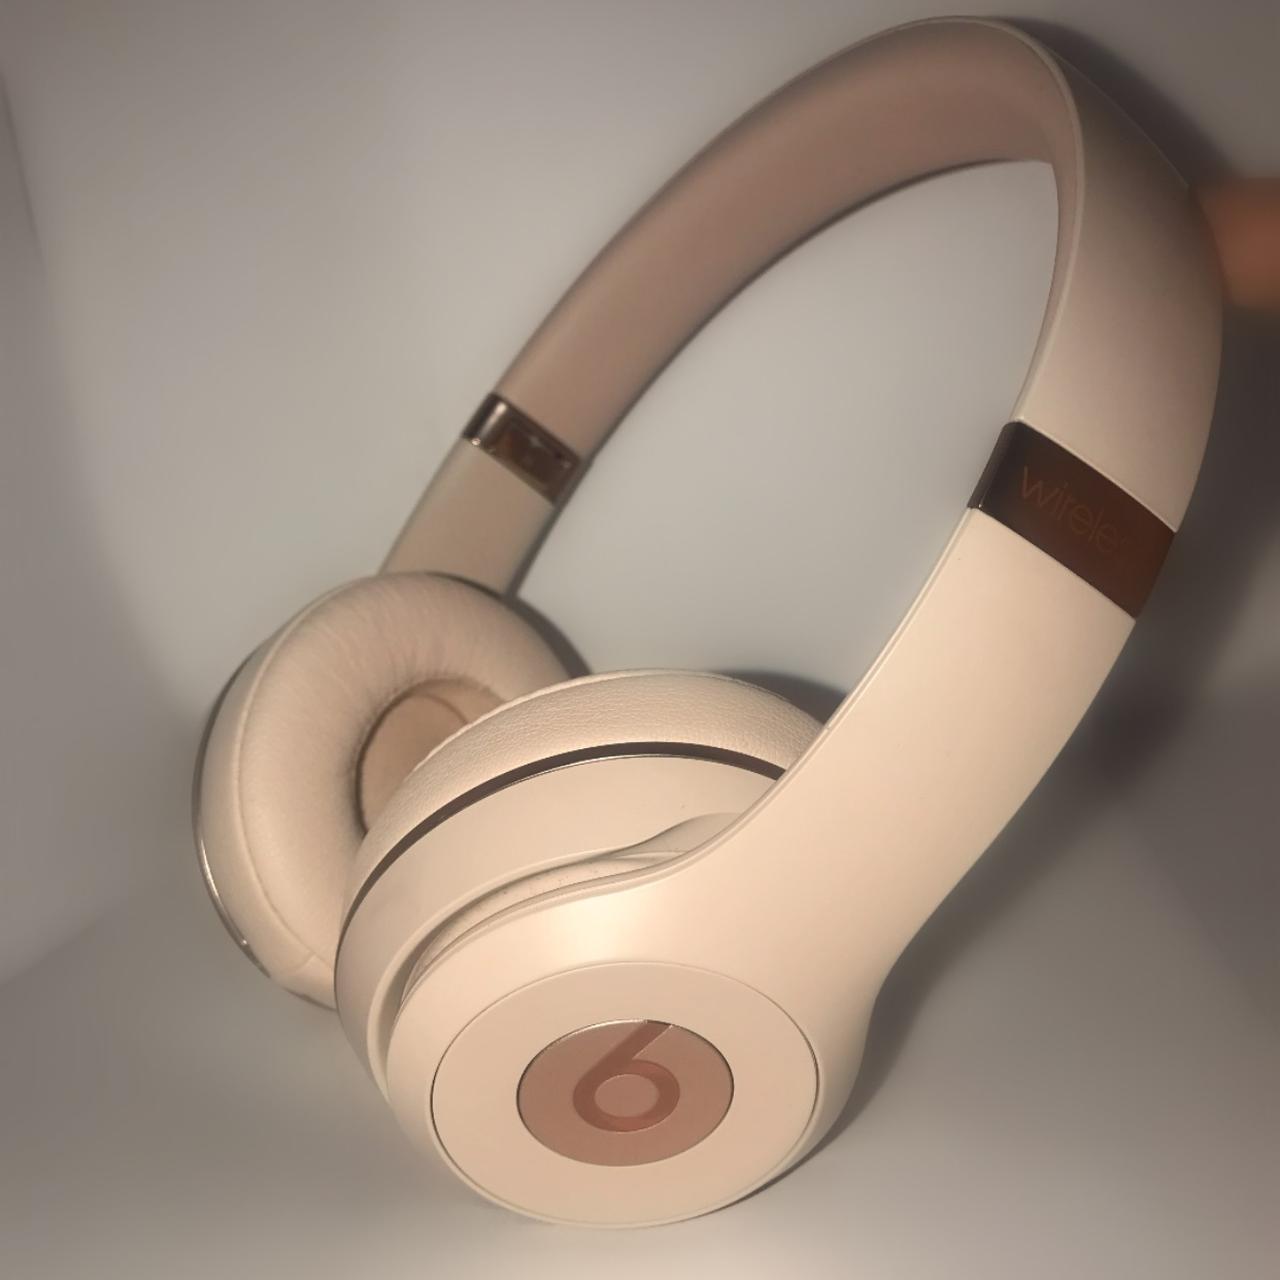 Beats Solo3 Wireless, Rose Gold. Almost brand new,... - Depop